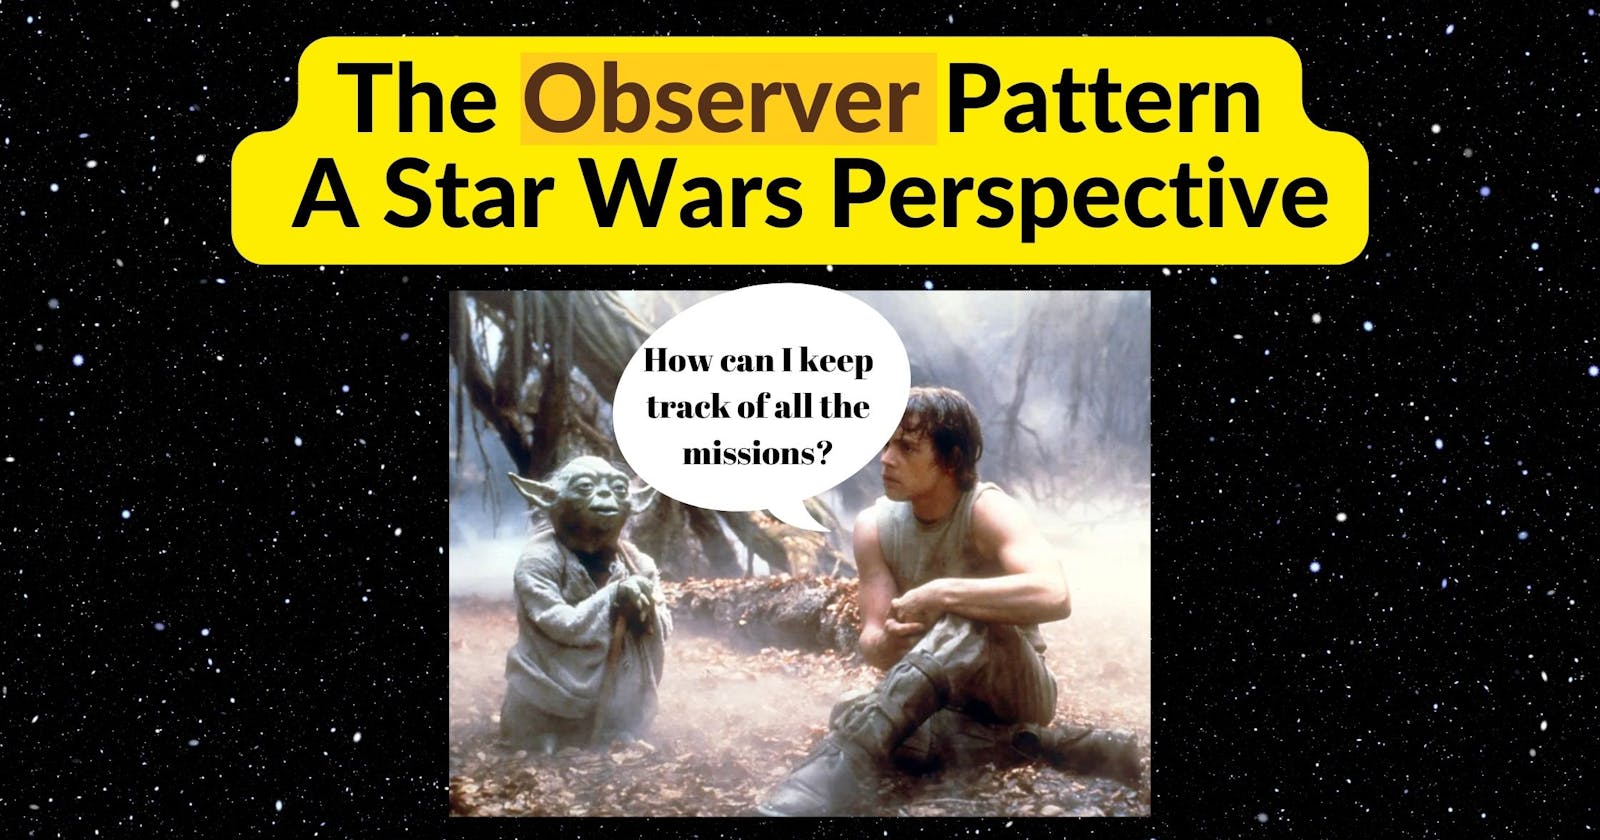 Star Wars Meets Software Development: A Guide to Implementing the Observer Pattern in C#